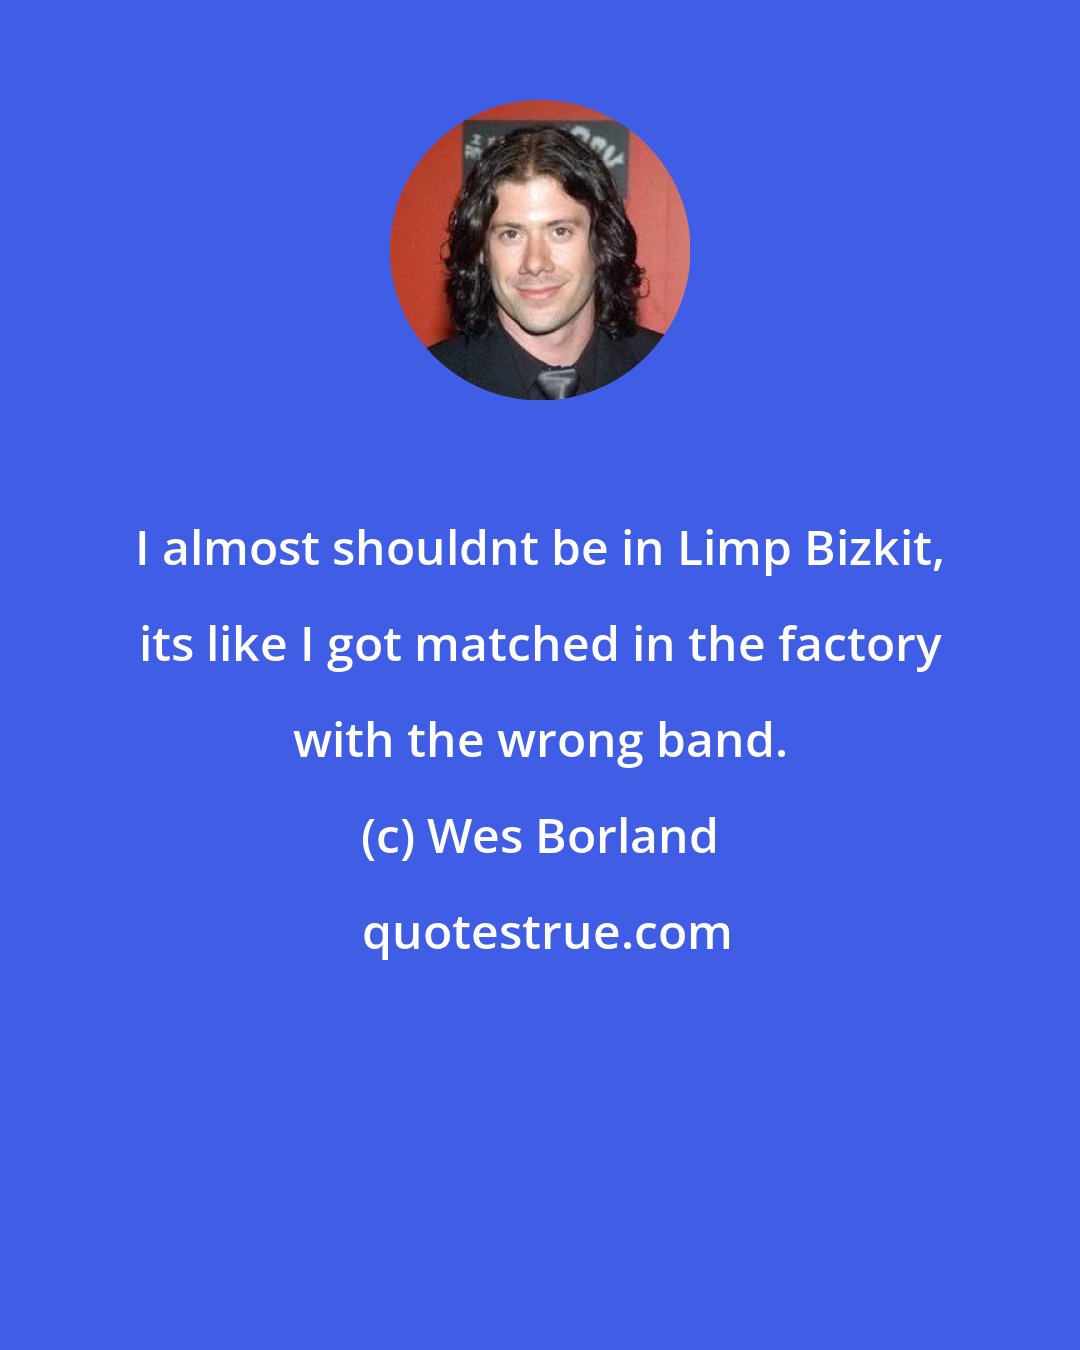 Wes Borland: I almost shouldnt be in Limp Bizkit, its like I got matched in the factory with the wrong band.